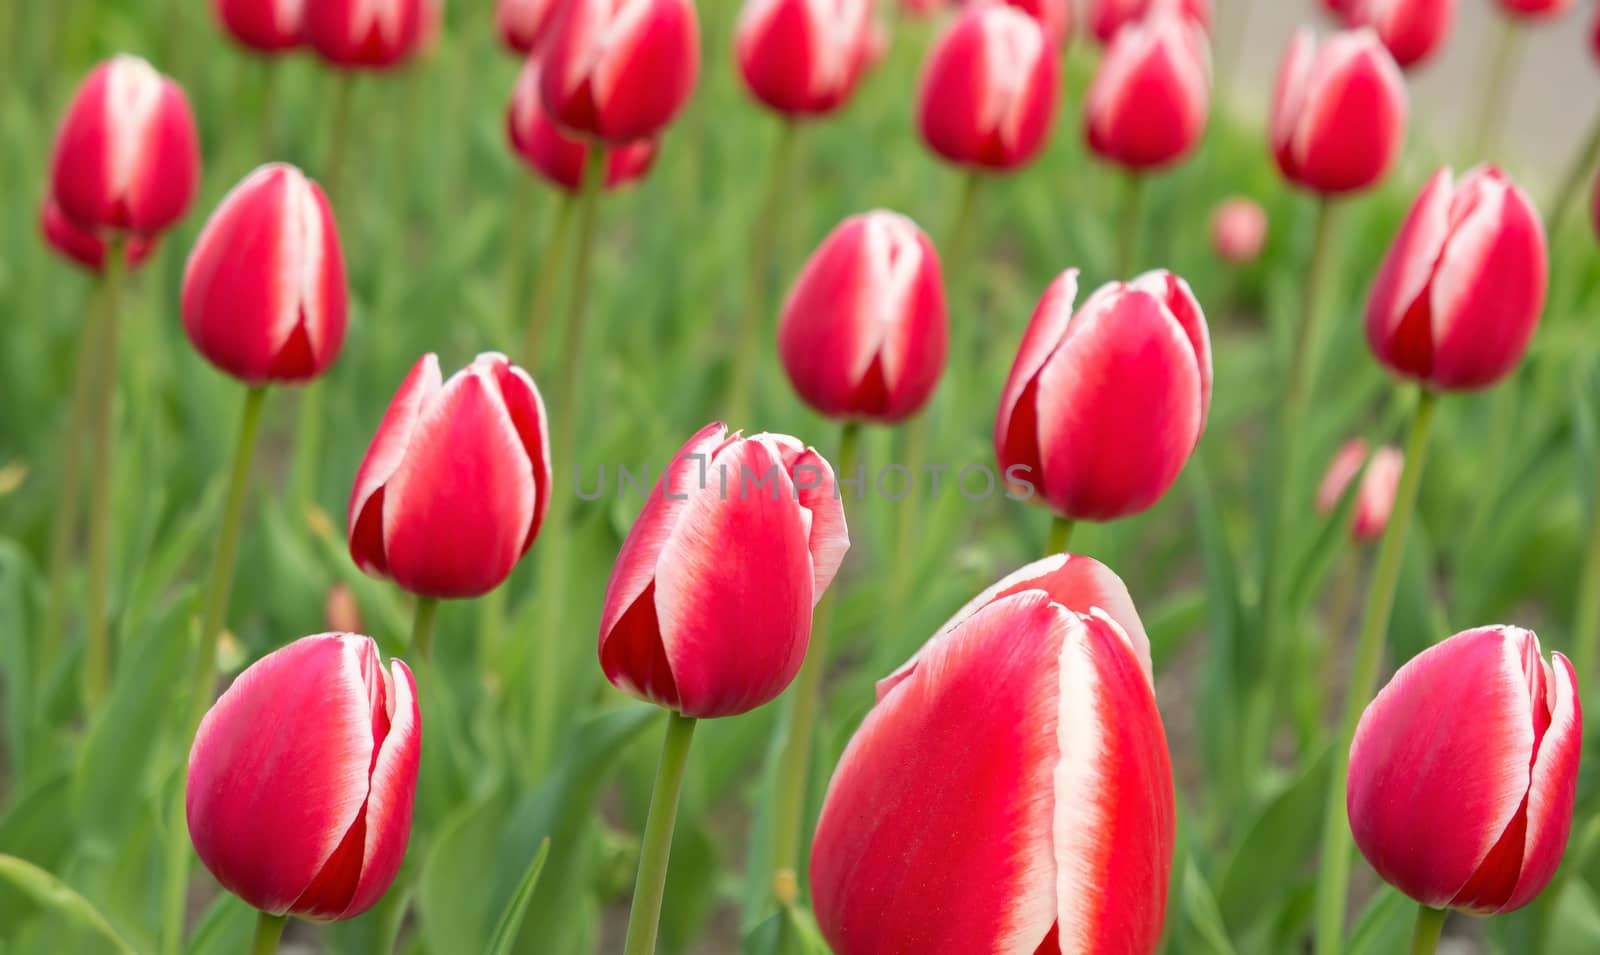 Background of beautiful red-white tulips in spring.